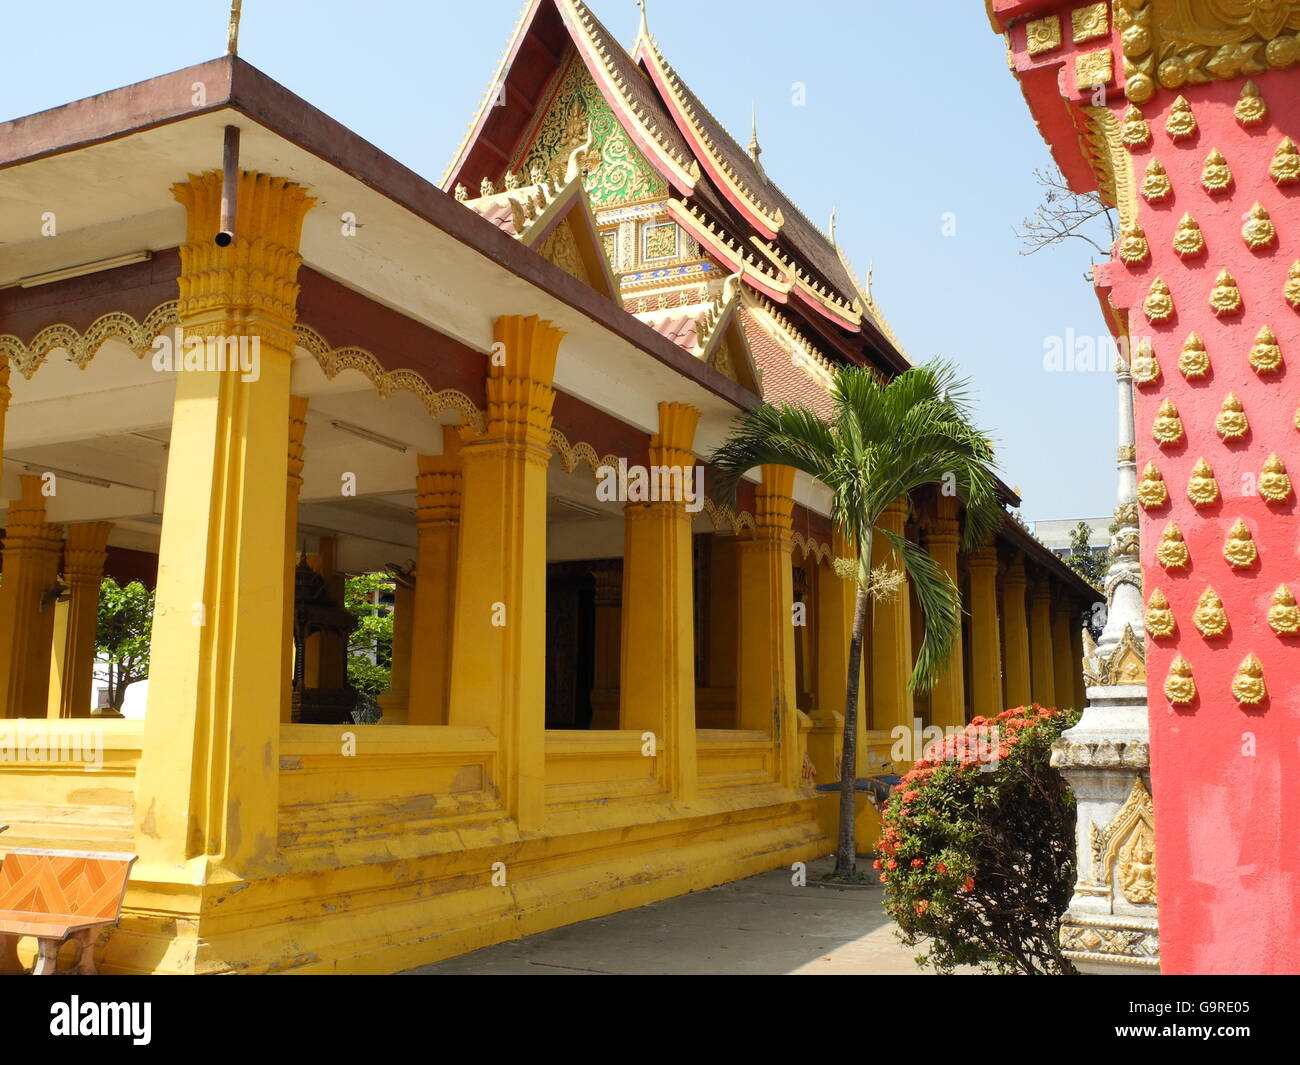 Wat Ong Teu Mahawihan, The Temple of the Heavy Buddha, Vientiane, province Vientiane, Laos, Asia / Vientiane Stock Photo